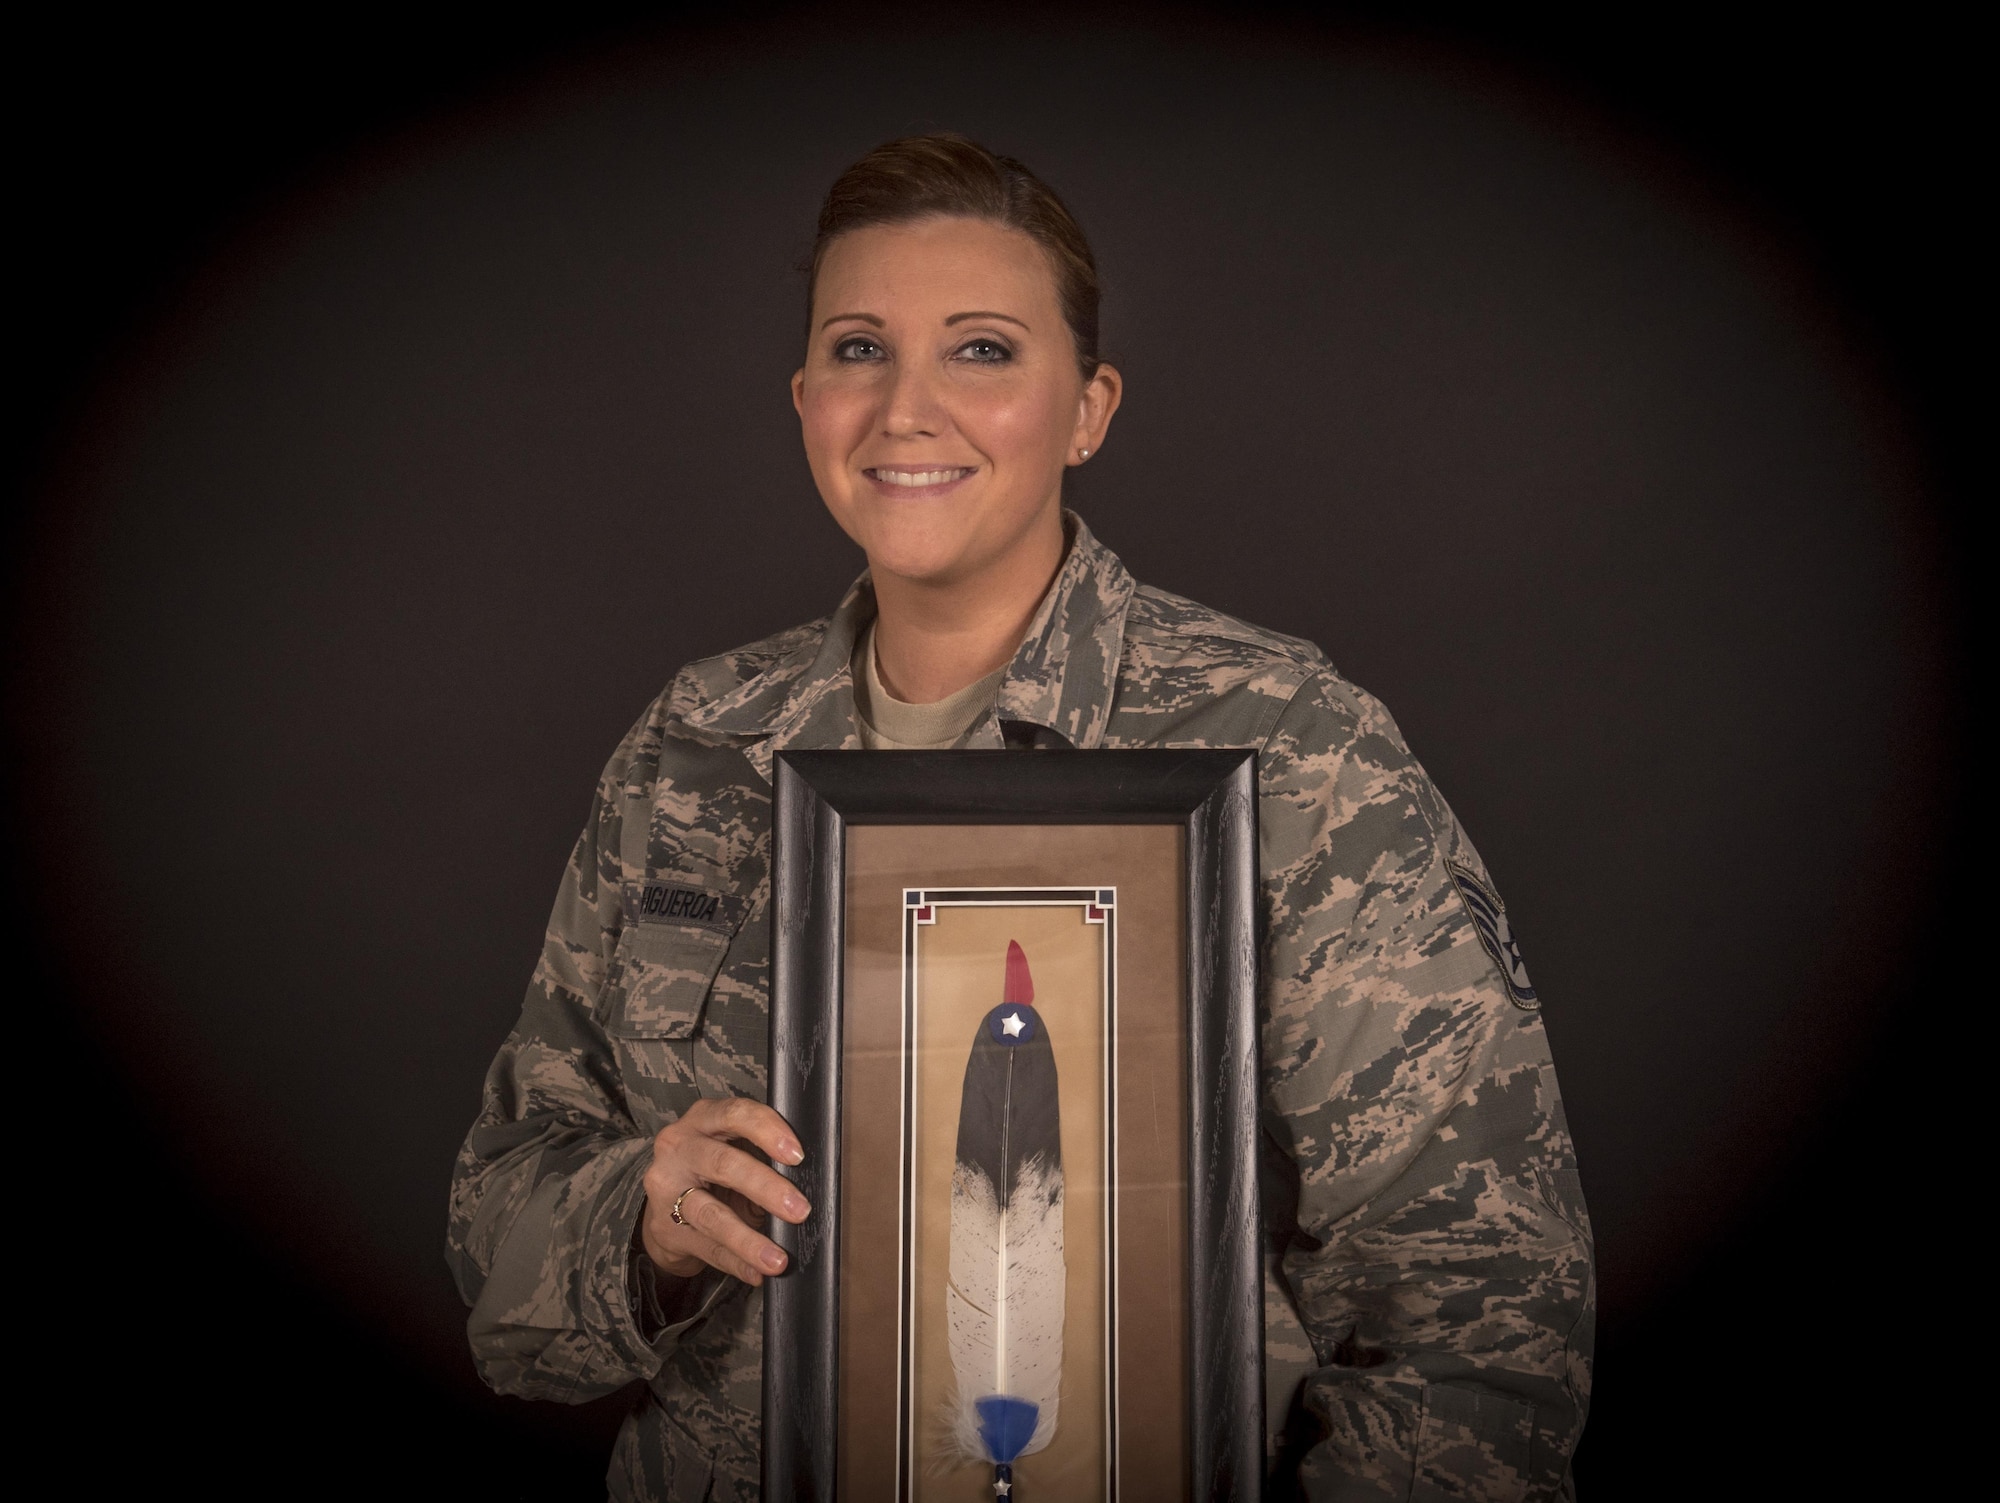 U.S. Air Force Staff Sgt. Thereasa Barker-Figueroa from the New Jersey Air National Guard's 108th Wing holds her 2016 Military Meritorious Service Award she was presented by the Society of American Indian Government Employees, Joint Base McGuire-Dix-Lakehurst, N.J., Oct. 4, 2016. Barker-Figueroa traces her lineage to the Lenni-Lenape, a group of Native American people from the Algonquin nation who populated New Jersey as well as parts of Pennsylvania and New York. (U.S. Air National Guard photo by Tech. Sgt. Matt Hecht/Released)